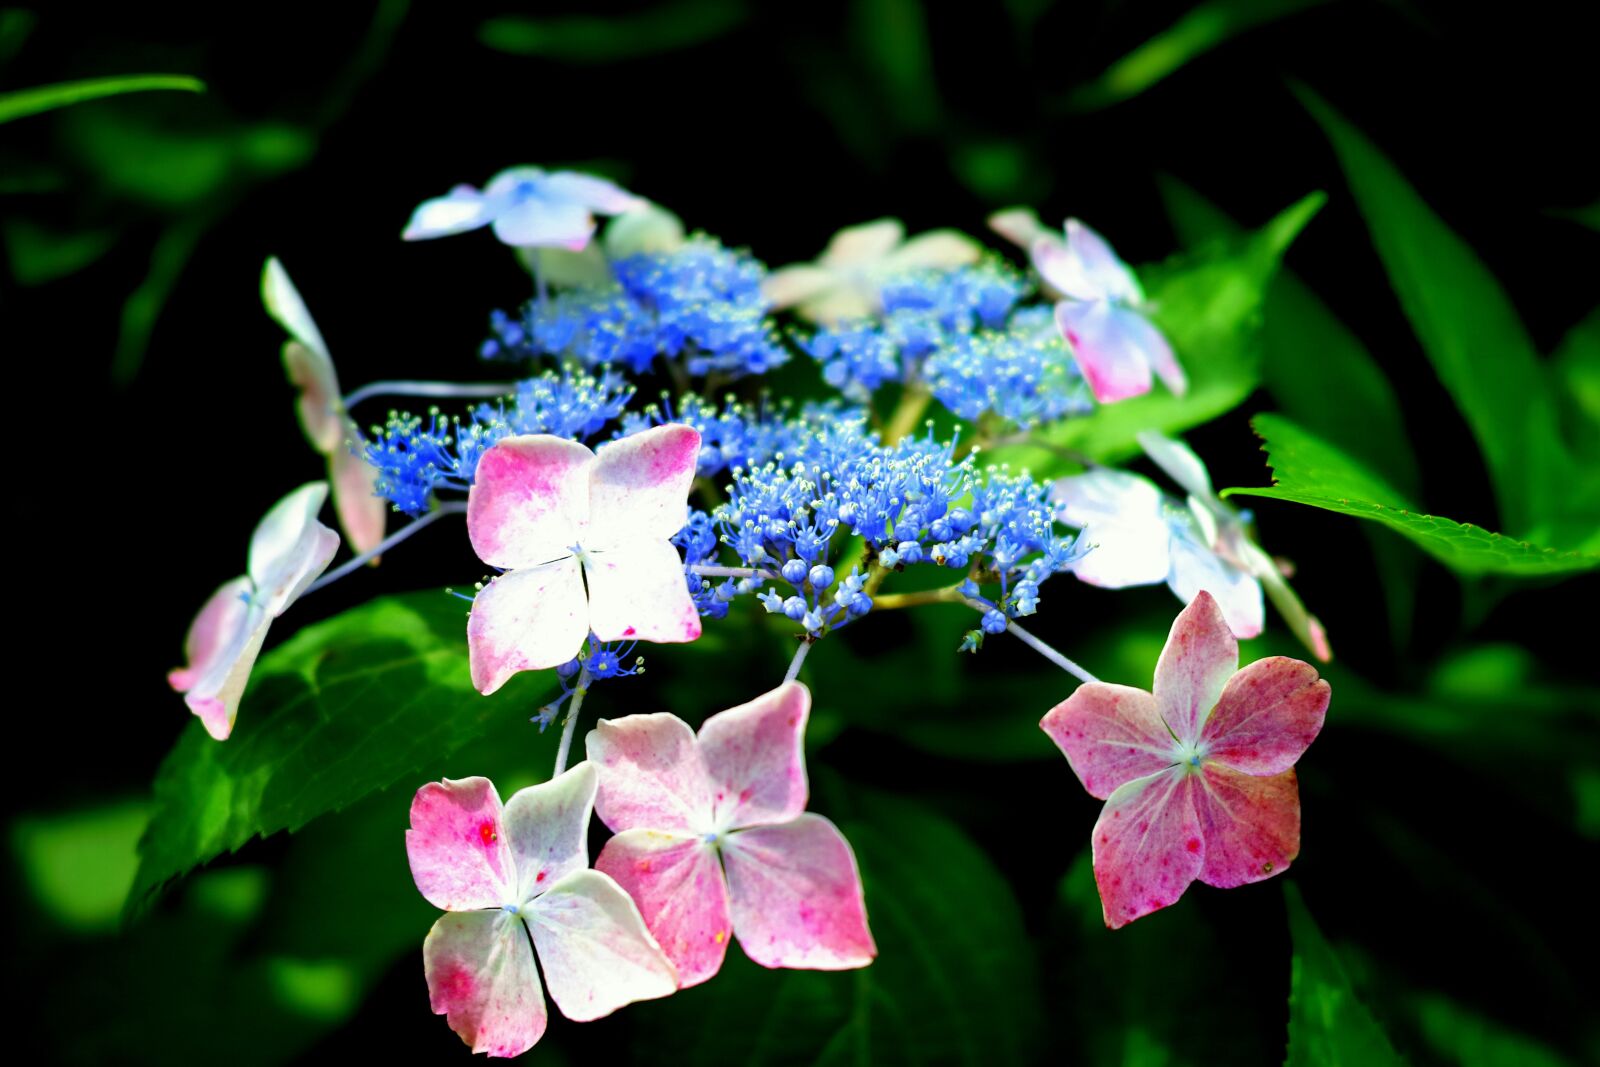 Sigma DP2 Merrill sample photo. Hydrangea, in the early photography